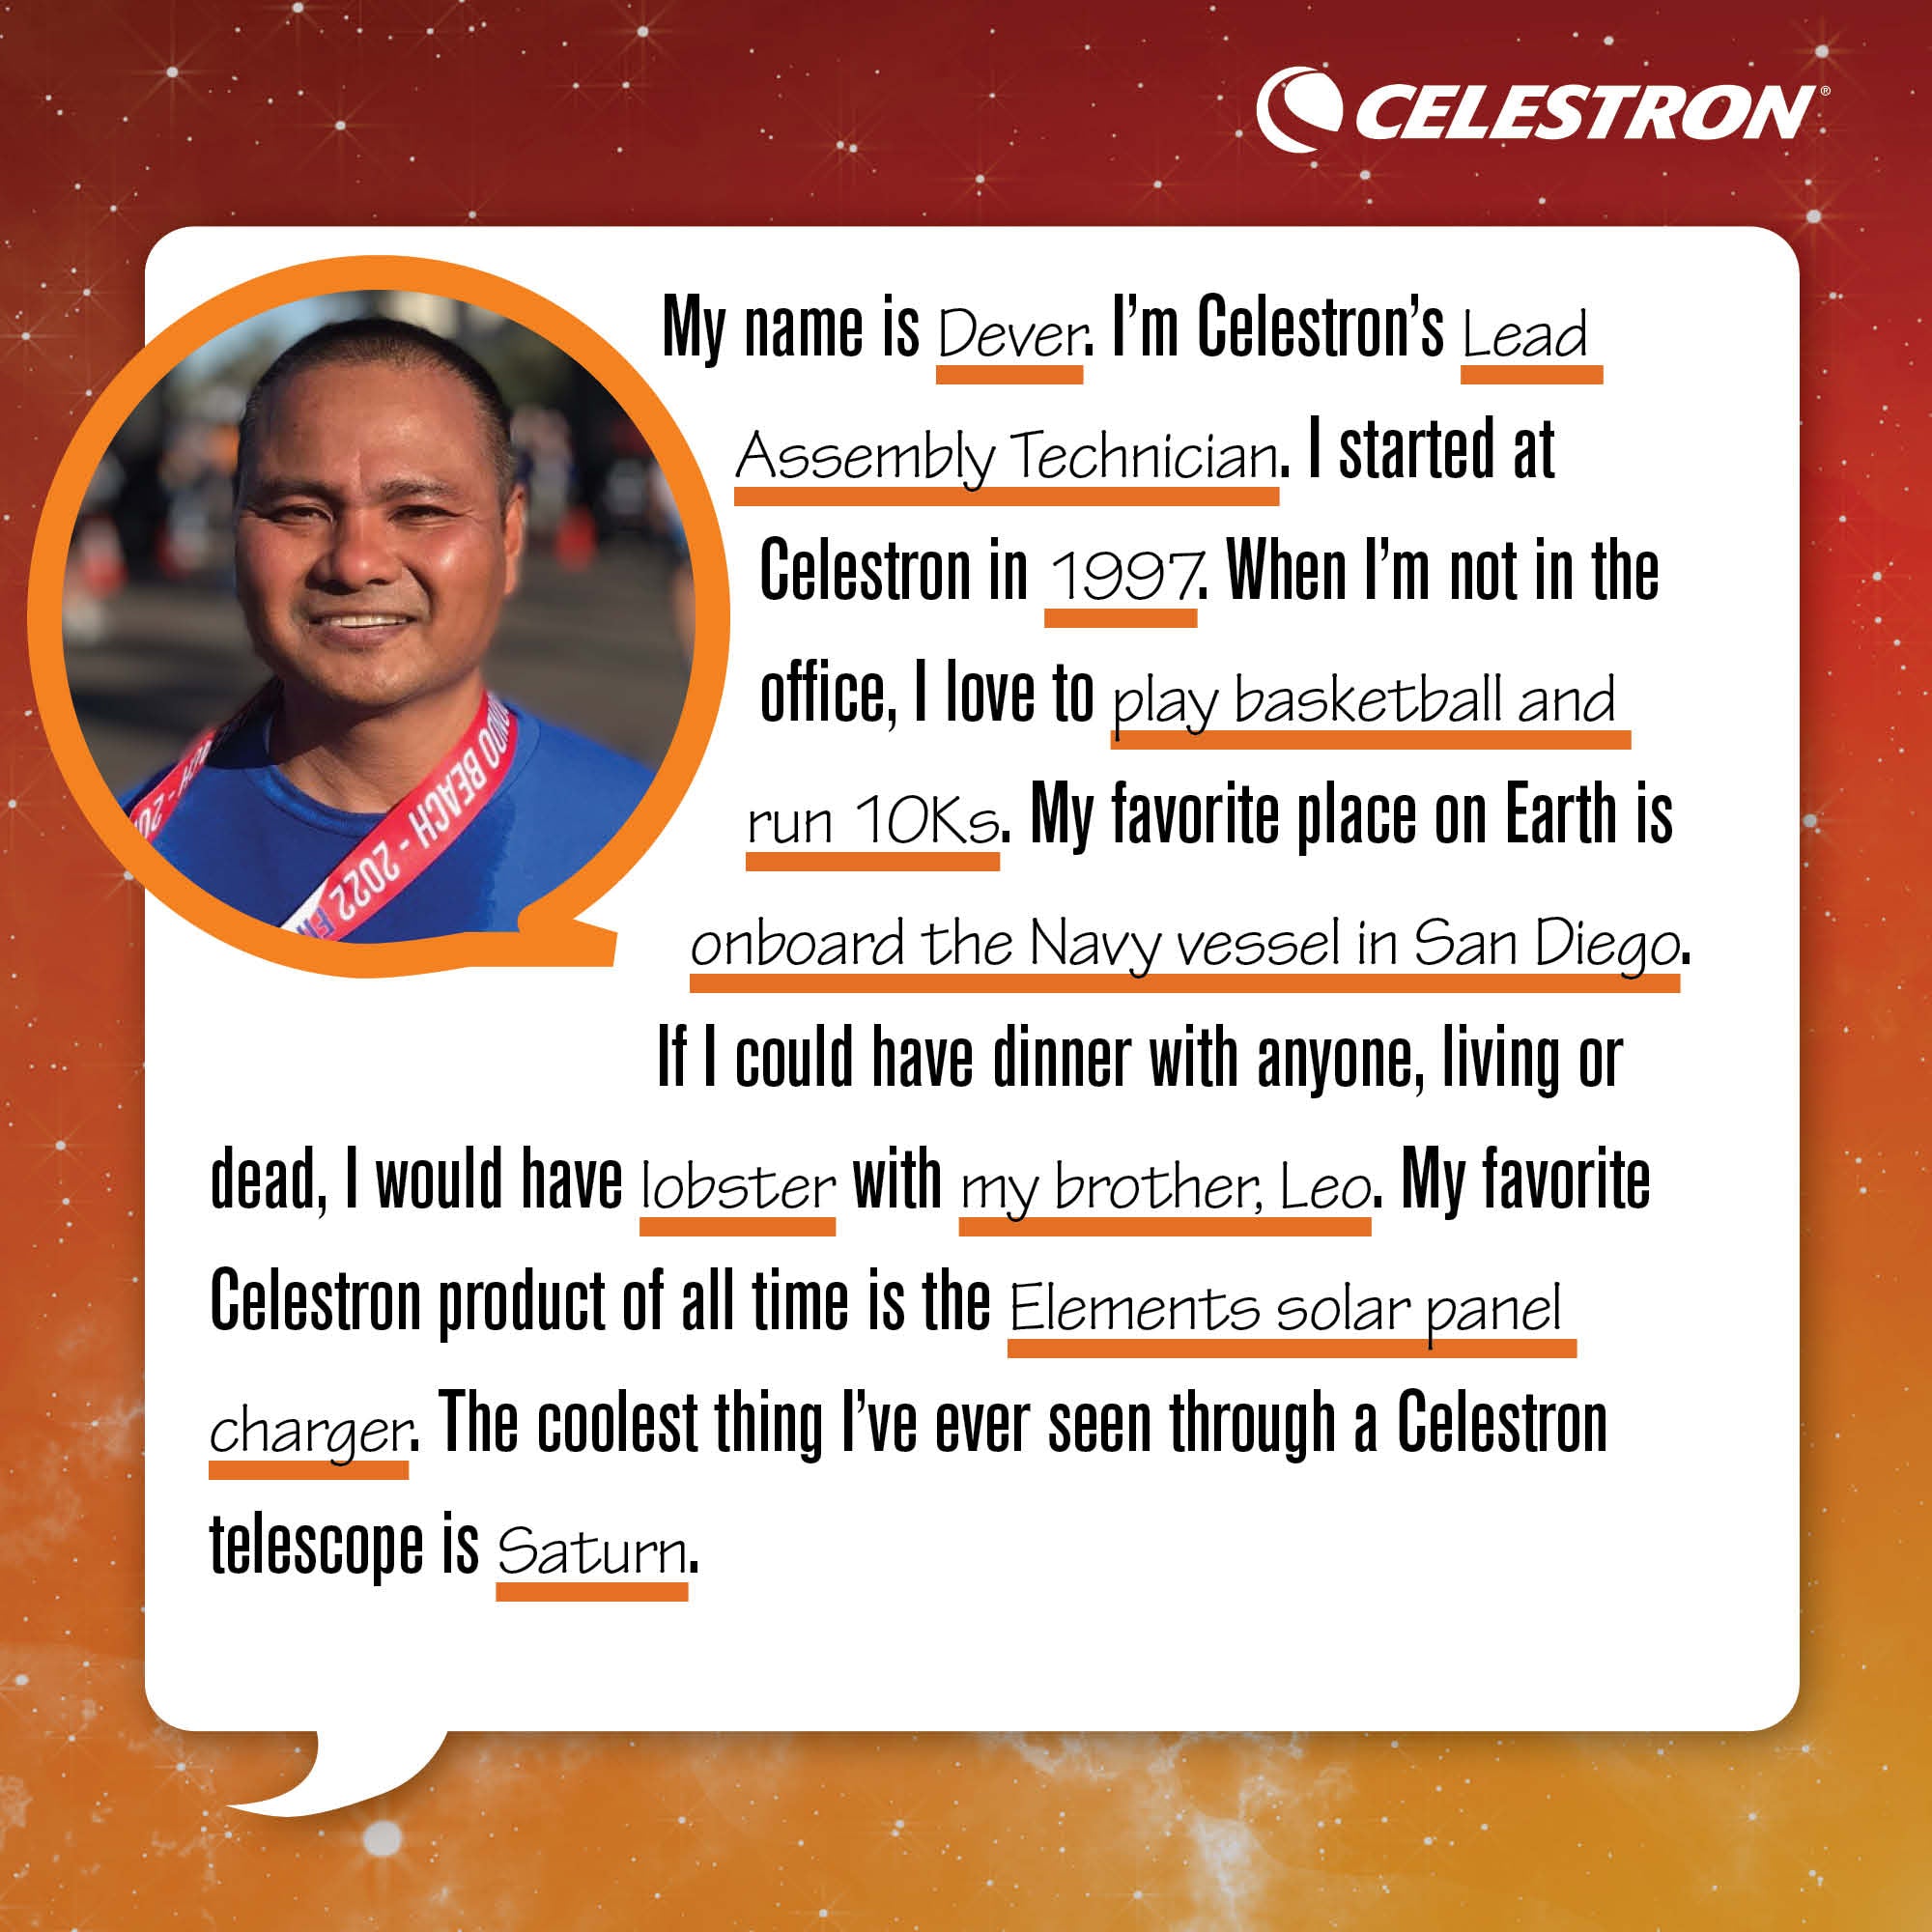 My name is Dever. I'm Celestron's Lead Assembly Technician. I started at Celestron in 1997. When I'm not in the office, I love to play basketball and run 10Ks. My favorite place on Earth is onboard the Navy vessel in San Diego. If I could have dinner with anyone, living or dead, I would have lobster with my brother, Leo. My favorite Celestron product of all time is the Elements solar panel charger. The coolest thing I've ever seen through a Celestron telescope is Saturn.